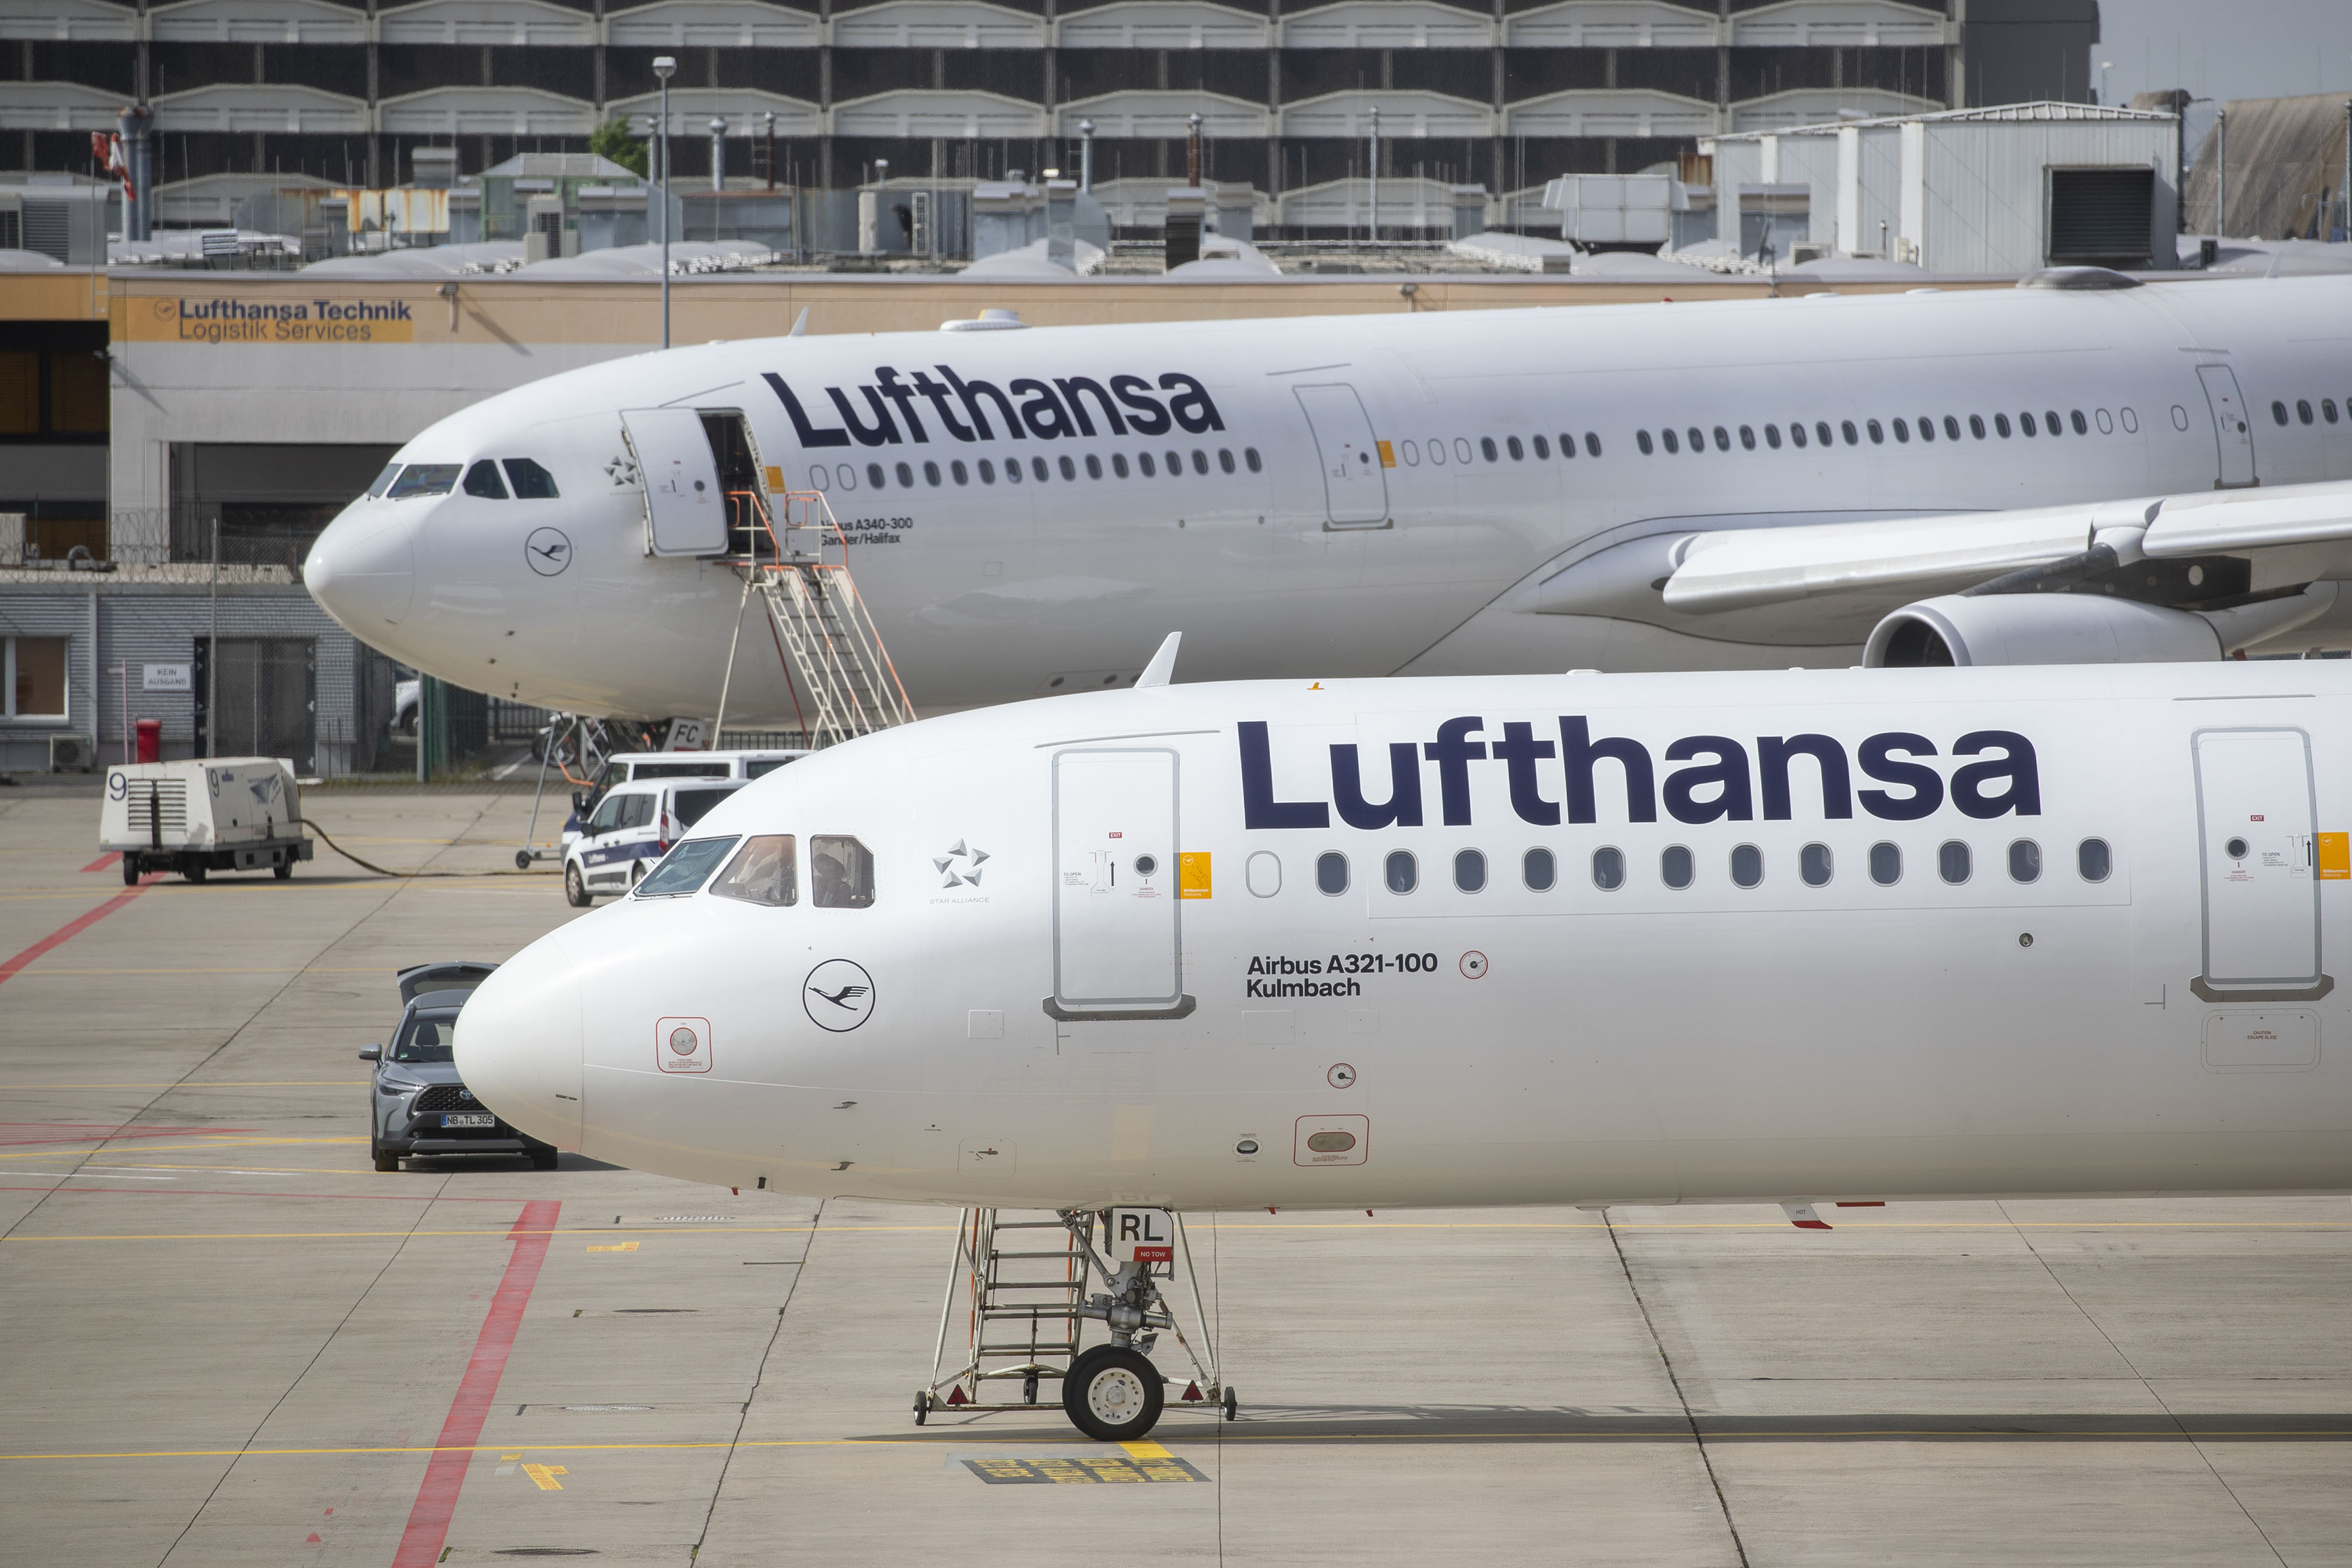 Lufthansa aircrafts are parked at the Frankfurt Airport, on April 8, in Frankfurt, Germany.